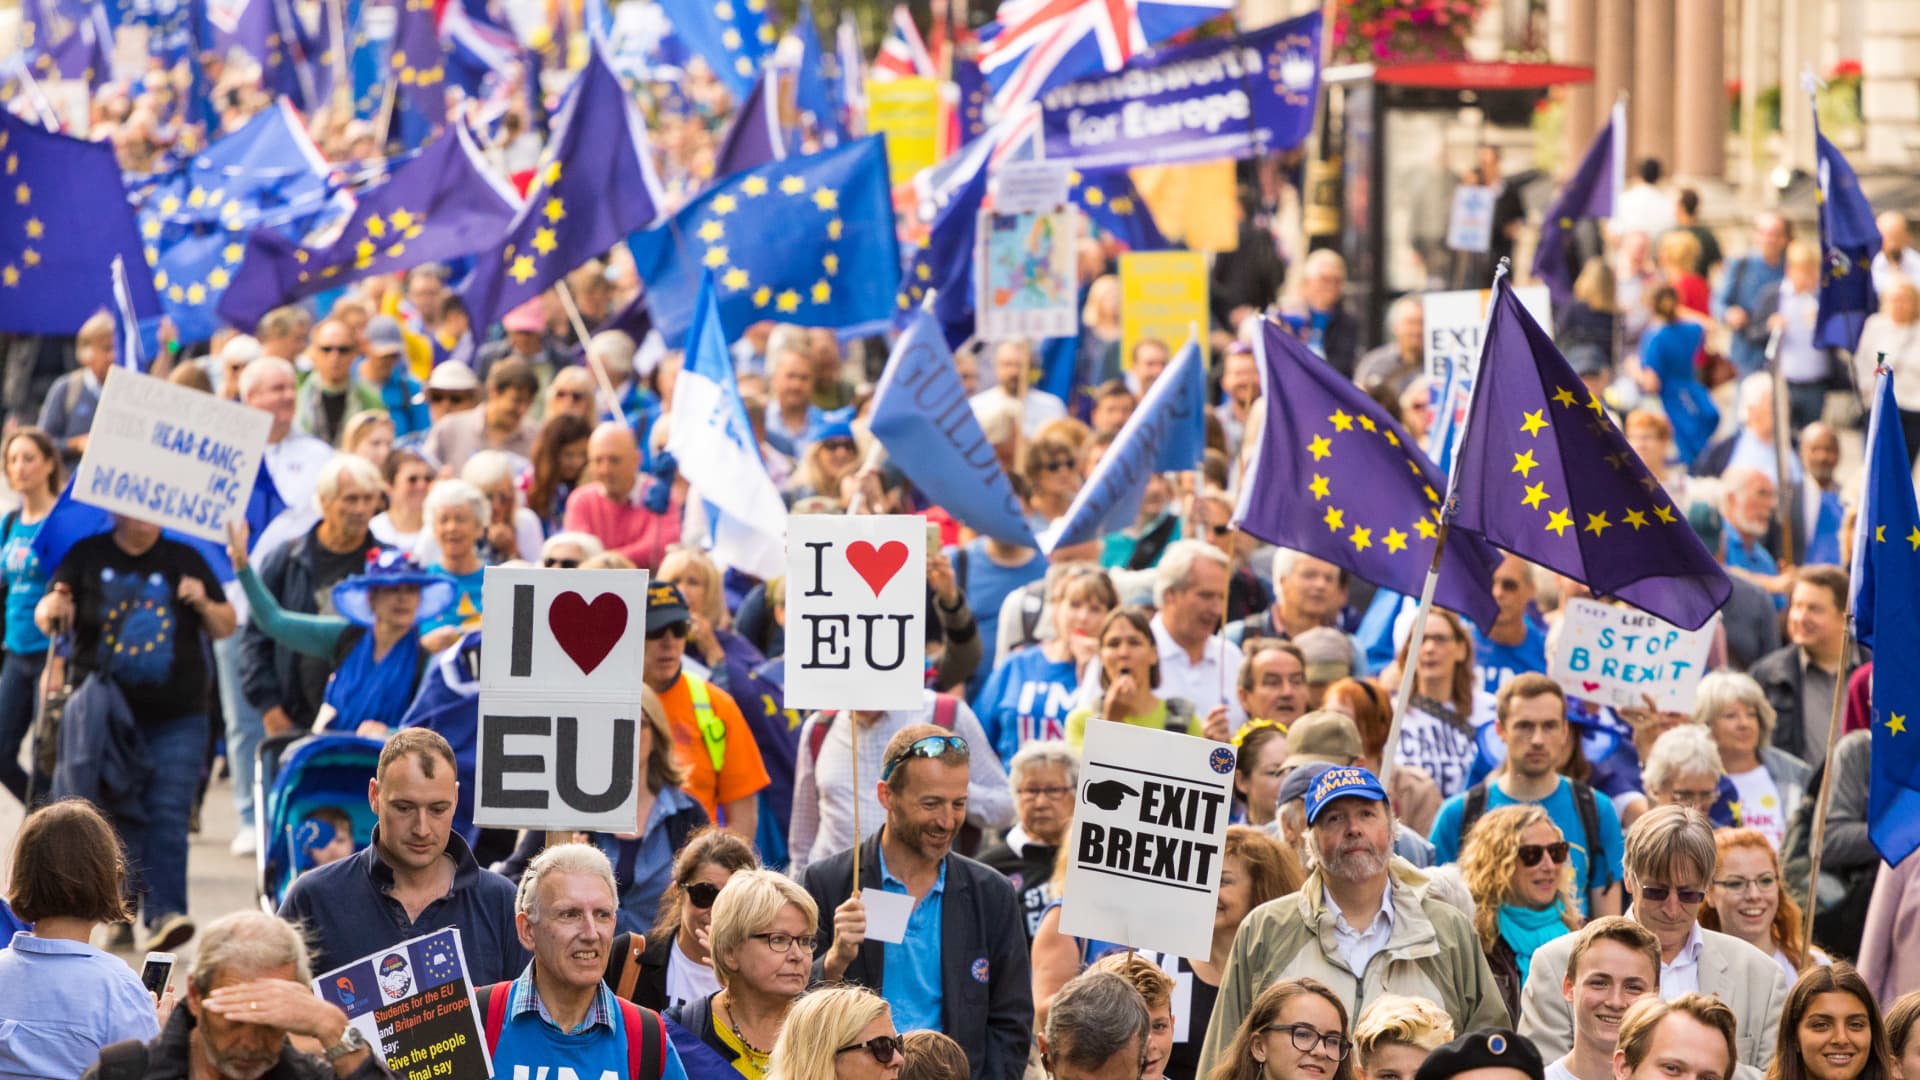 When Remainers protested against Brexit: Thousands of protesters gather in London on September 09, 2017 in London, England.